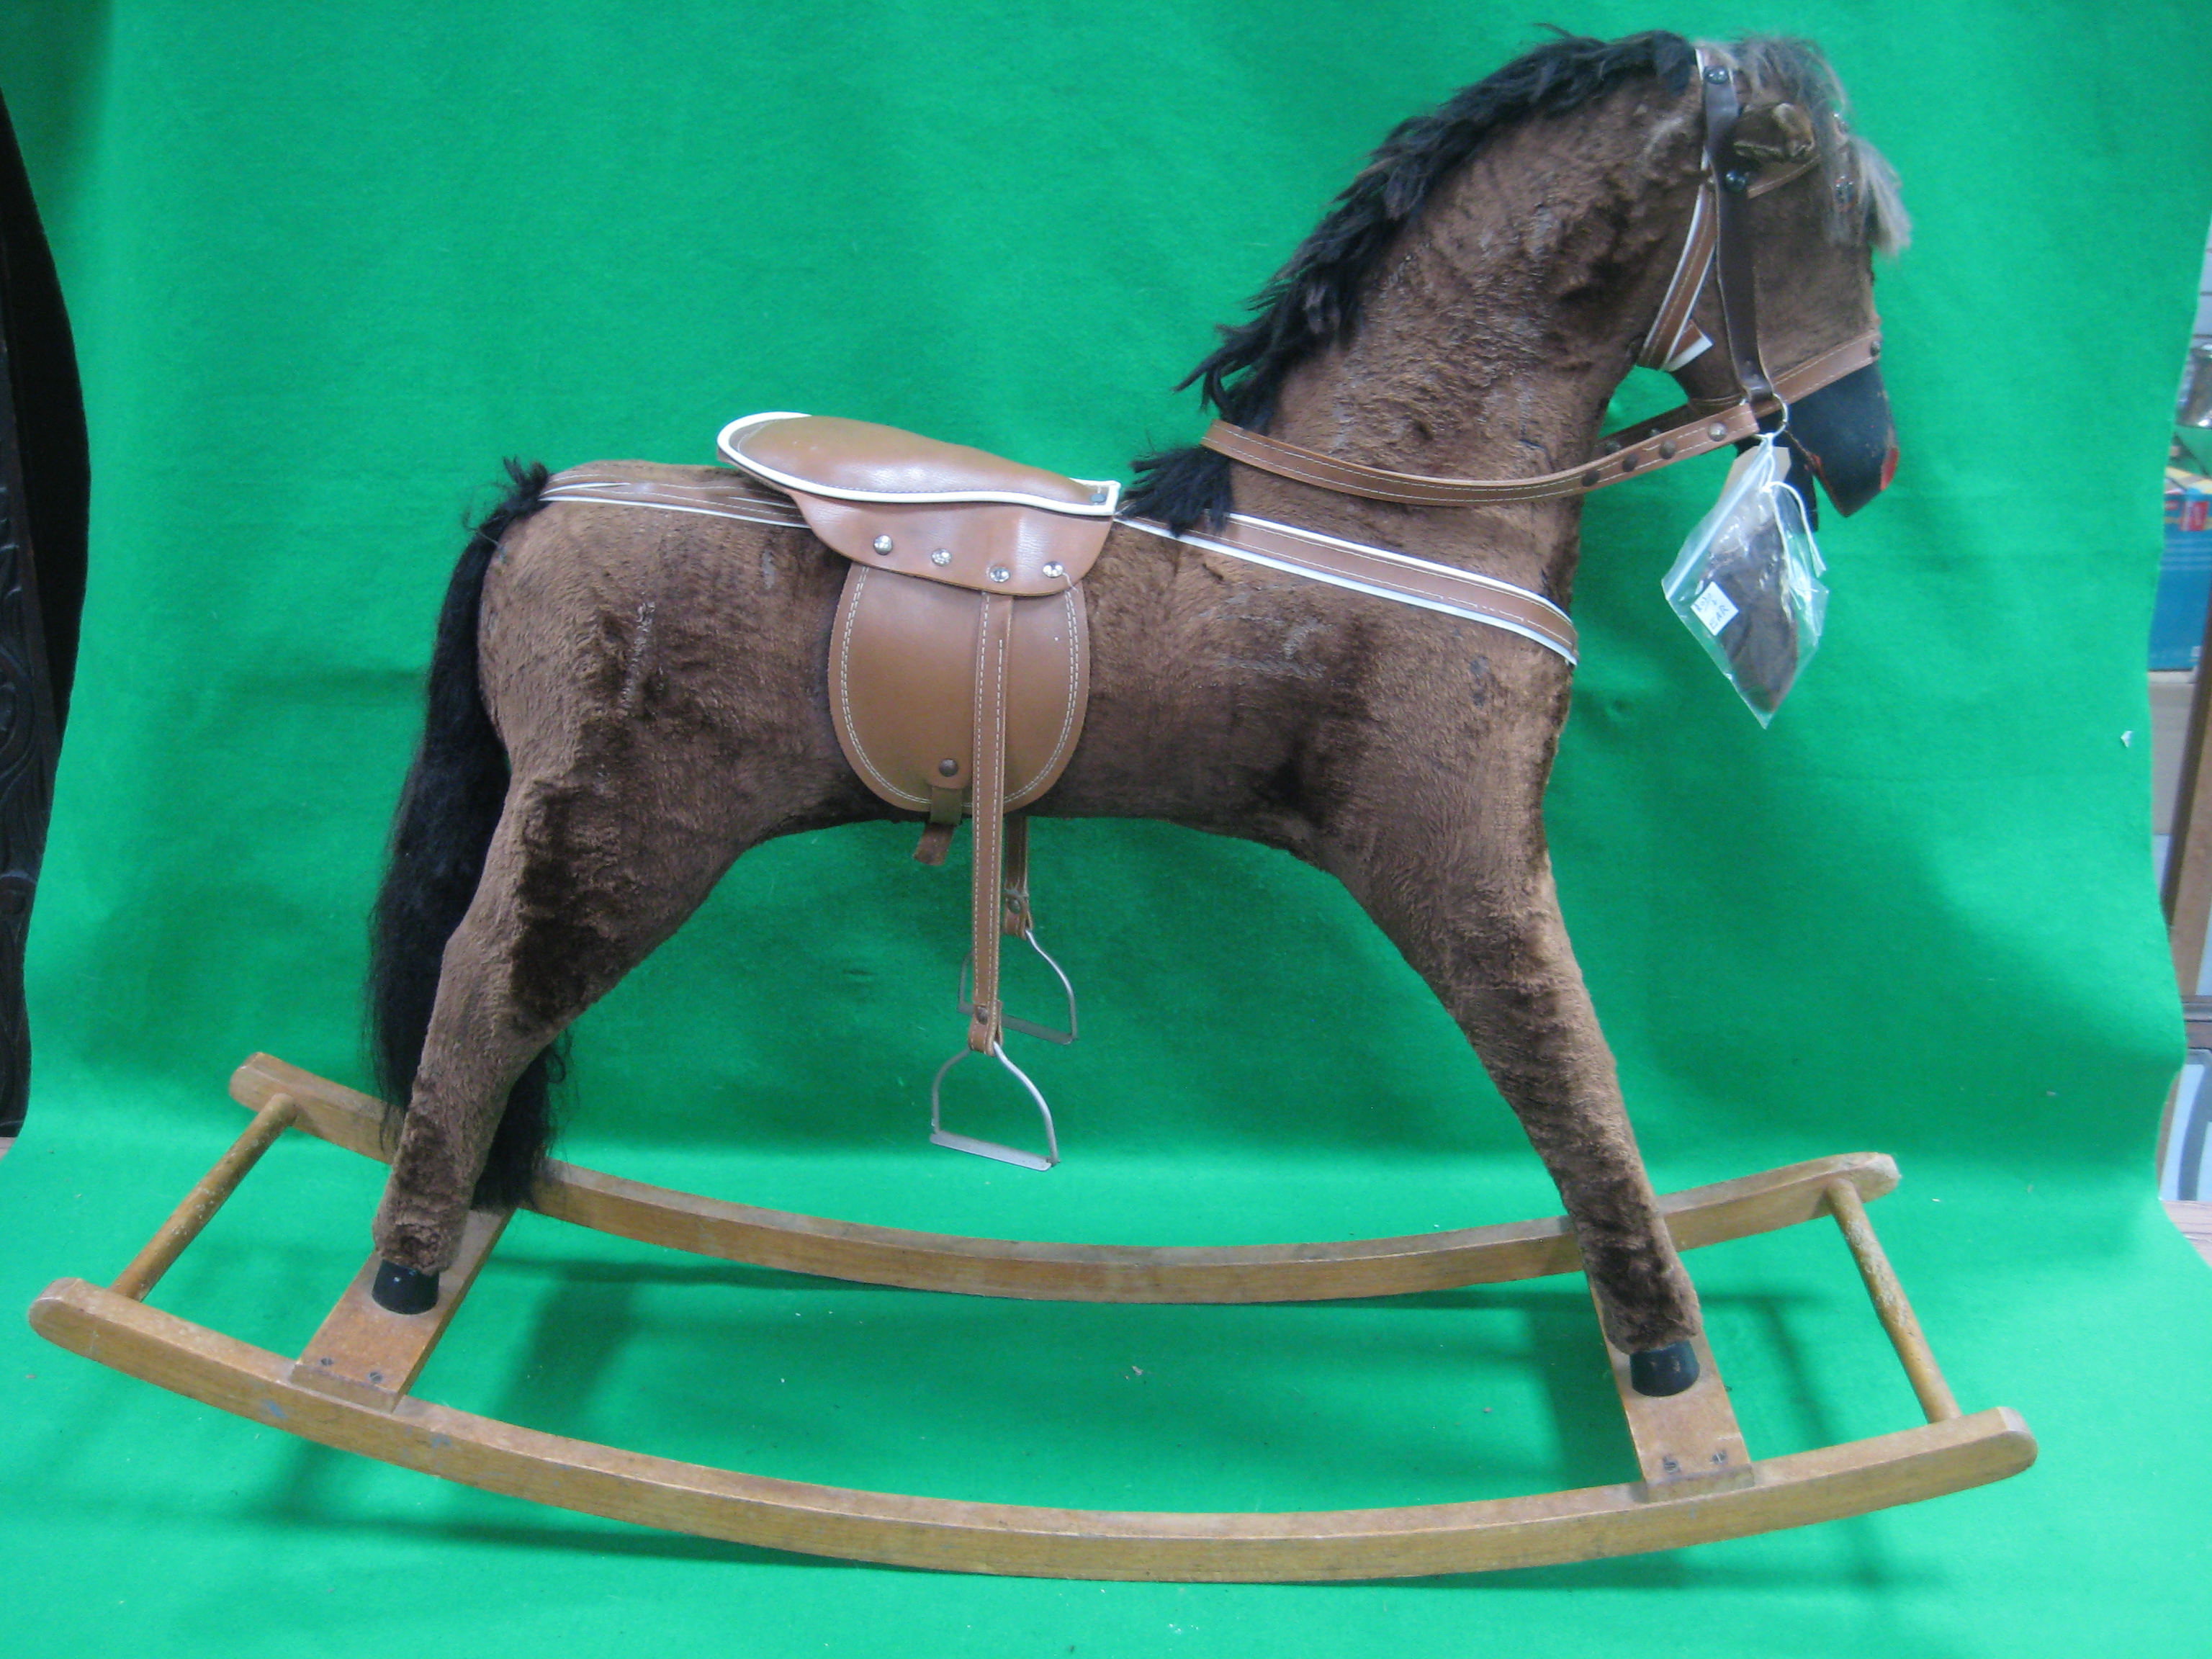 A rocking horse with bridle and saddle